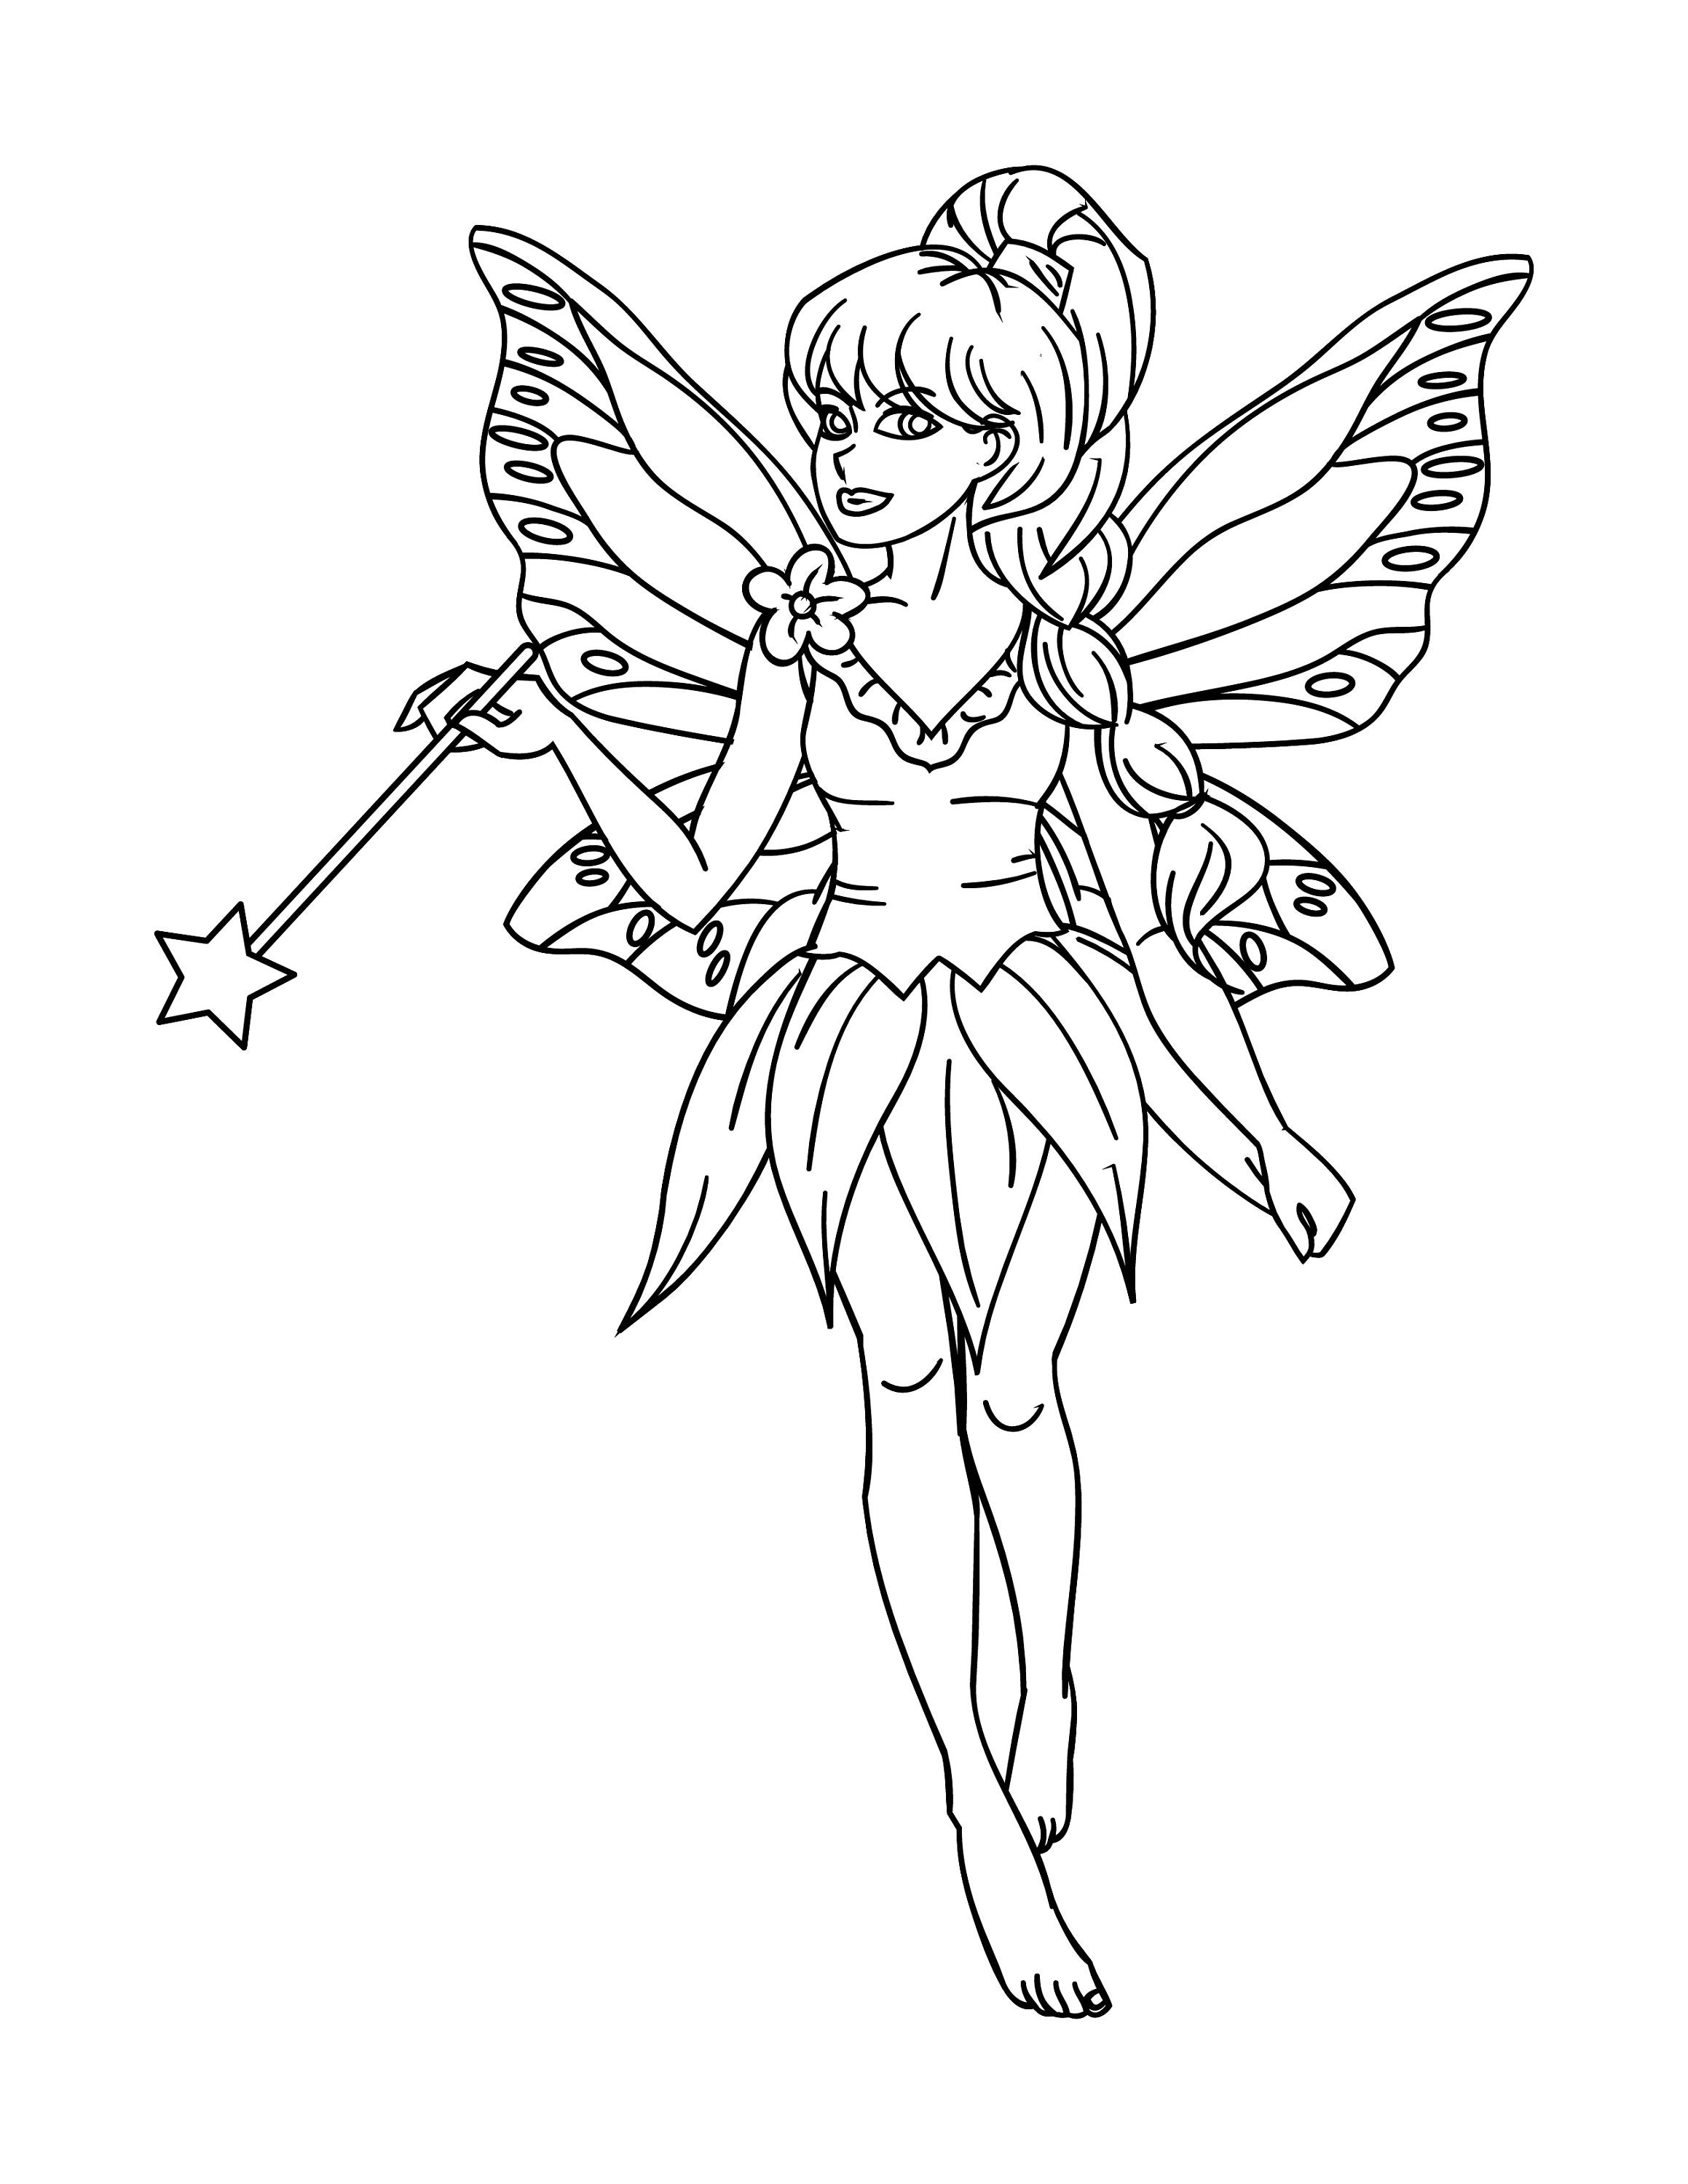 Fairy Coloring Pages Fairy Printables Fairy Coloring For | Etsy